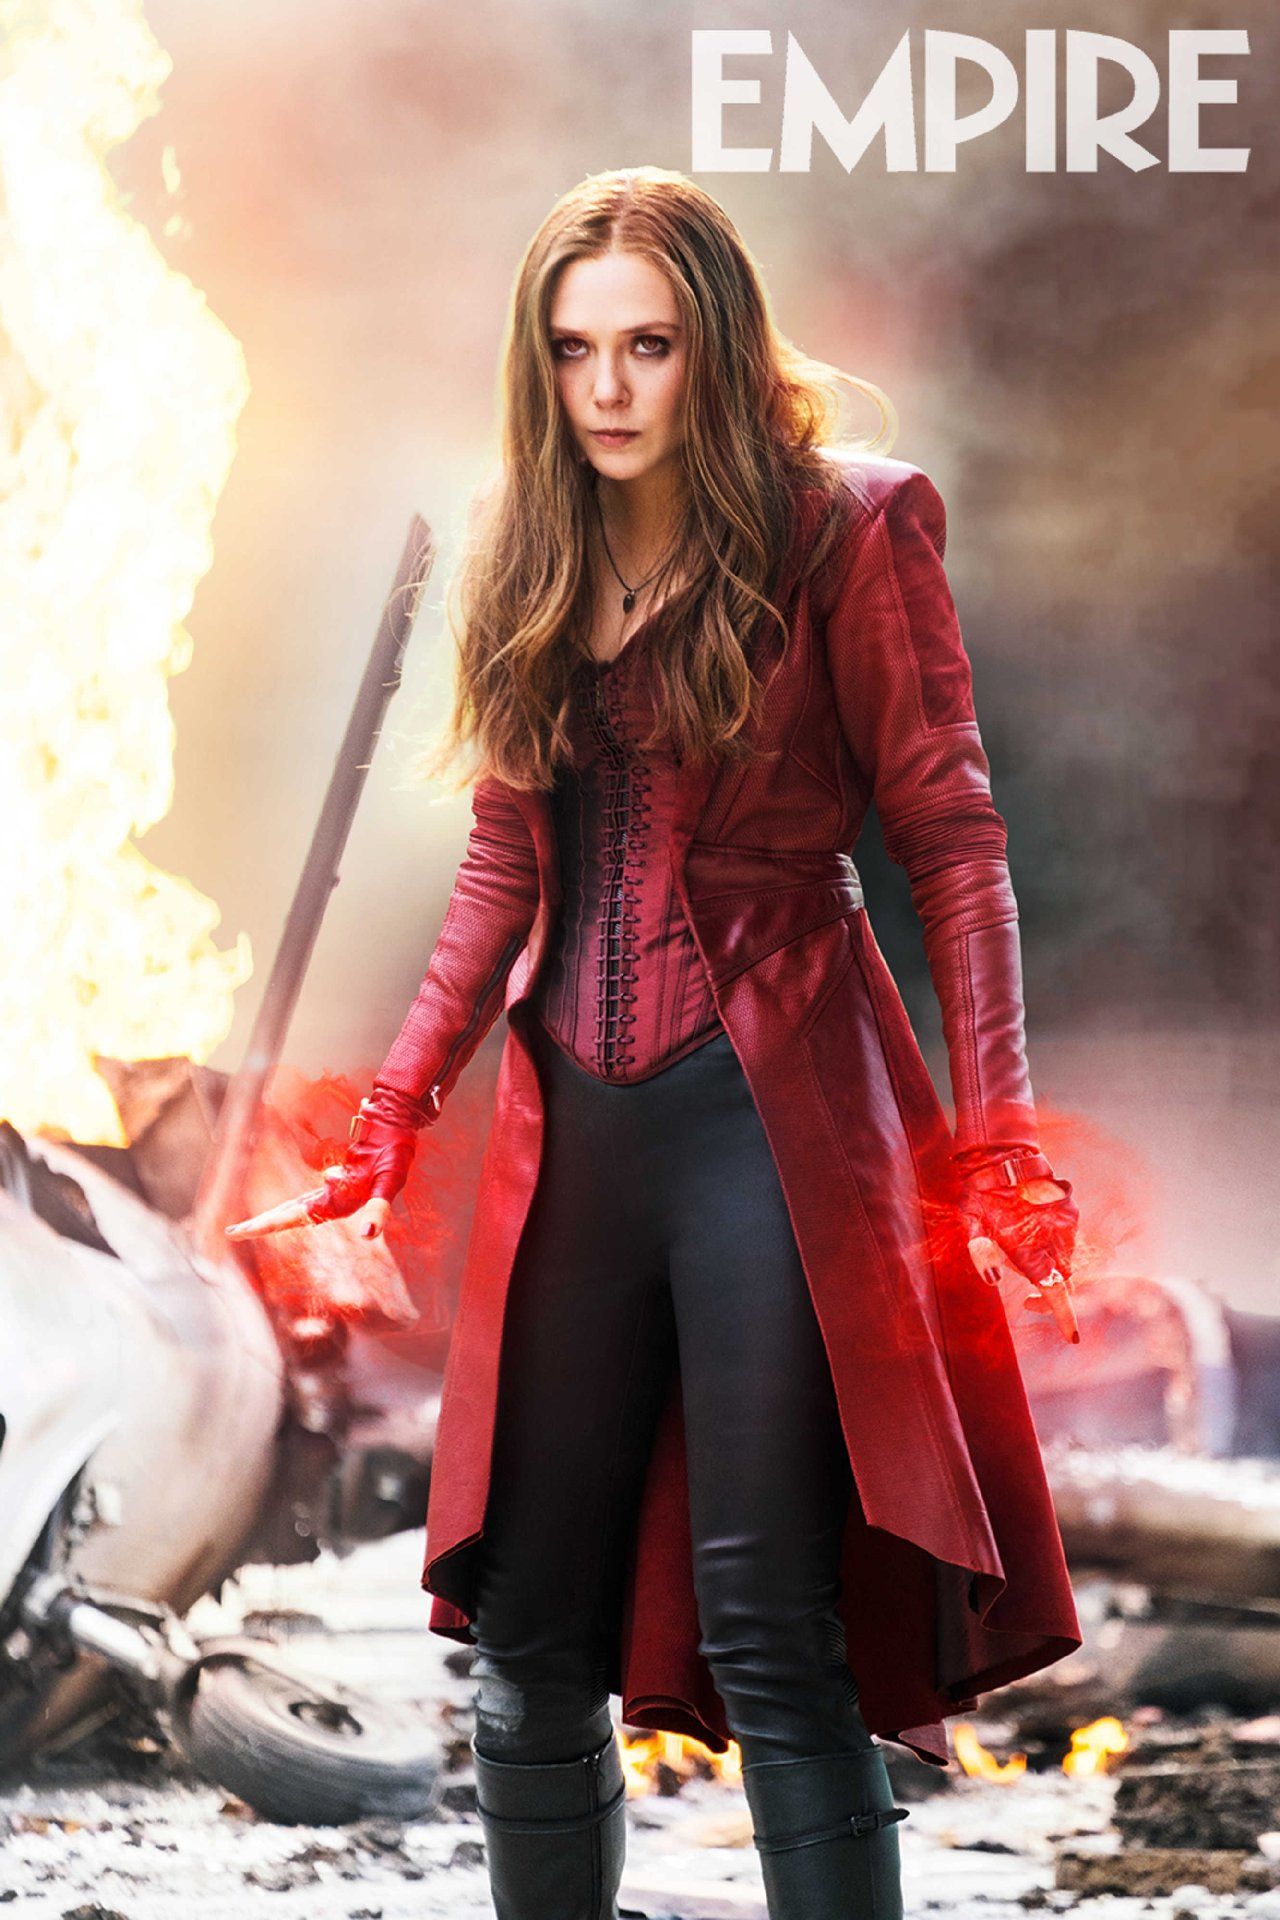 EMPIRE's Exclusive CIVIL WAR still of Scarlet Witch